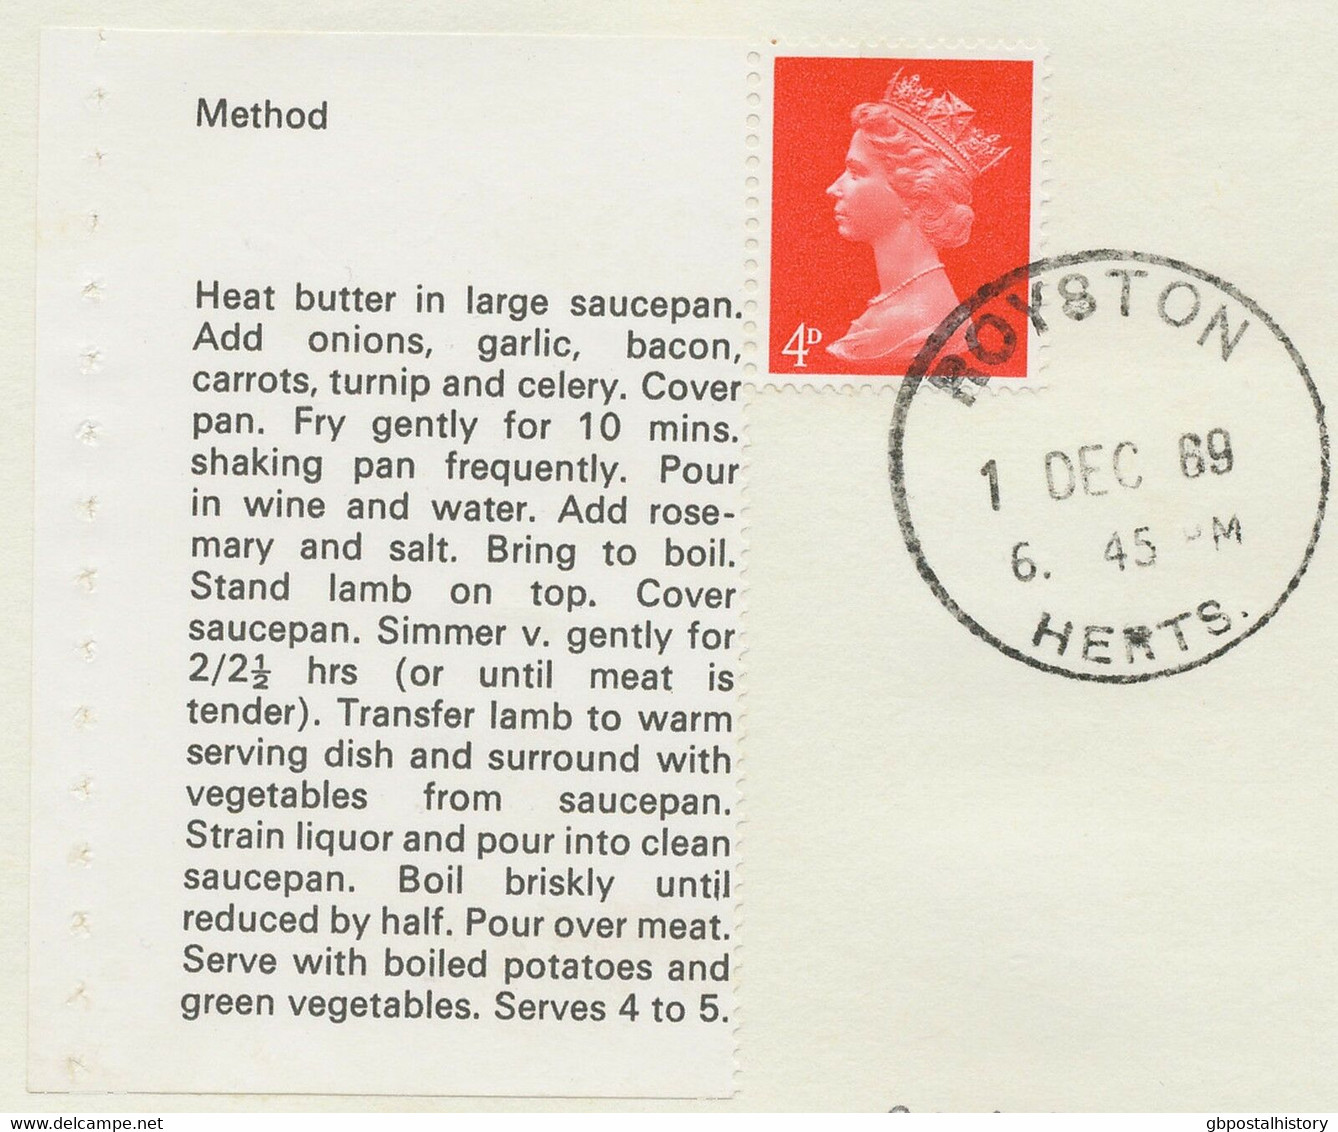 GB 1969 Stamps For Cooks Text-pane Method (w One 4D Stamp) FDC ROYSTON / HERTS. - 1952-1971 Pre-Decimale Uitgaves